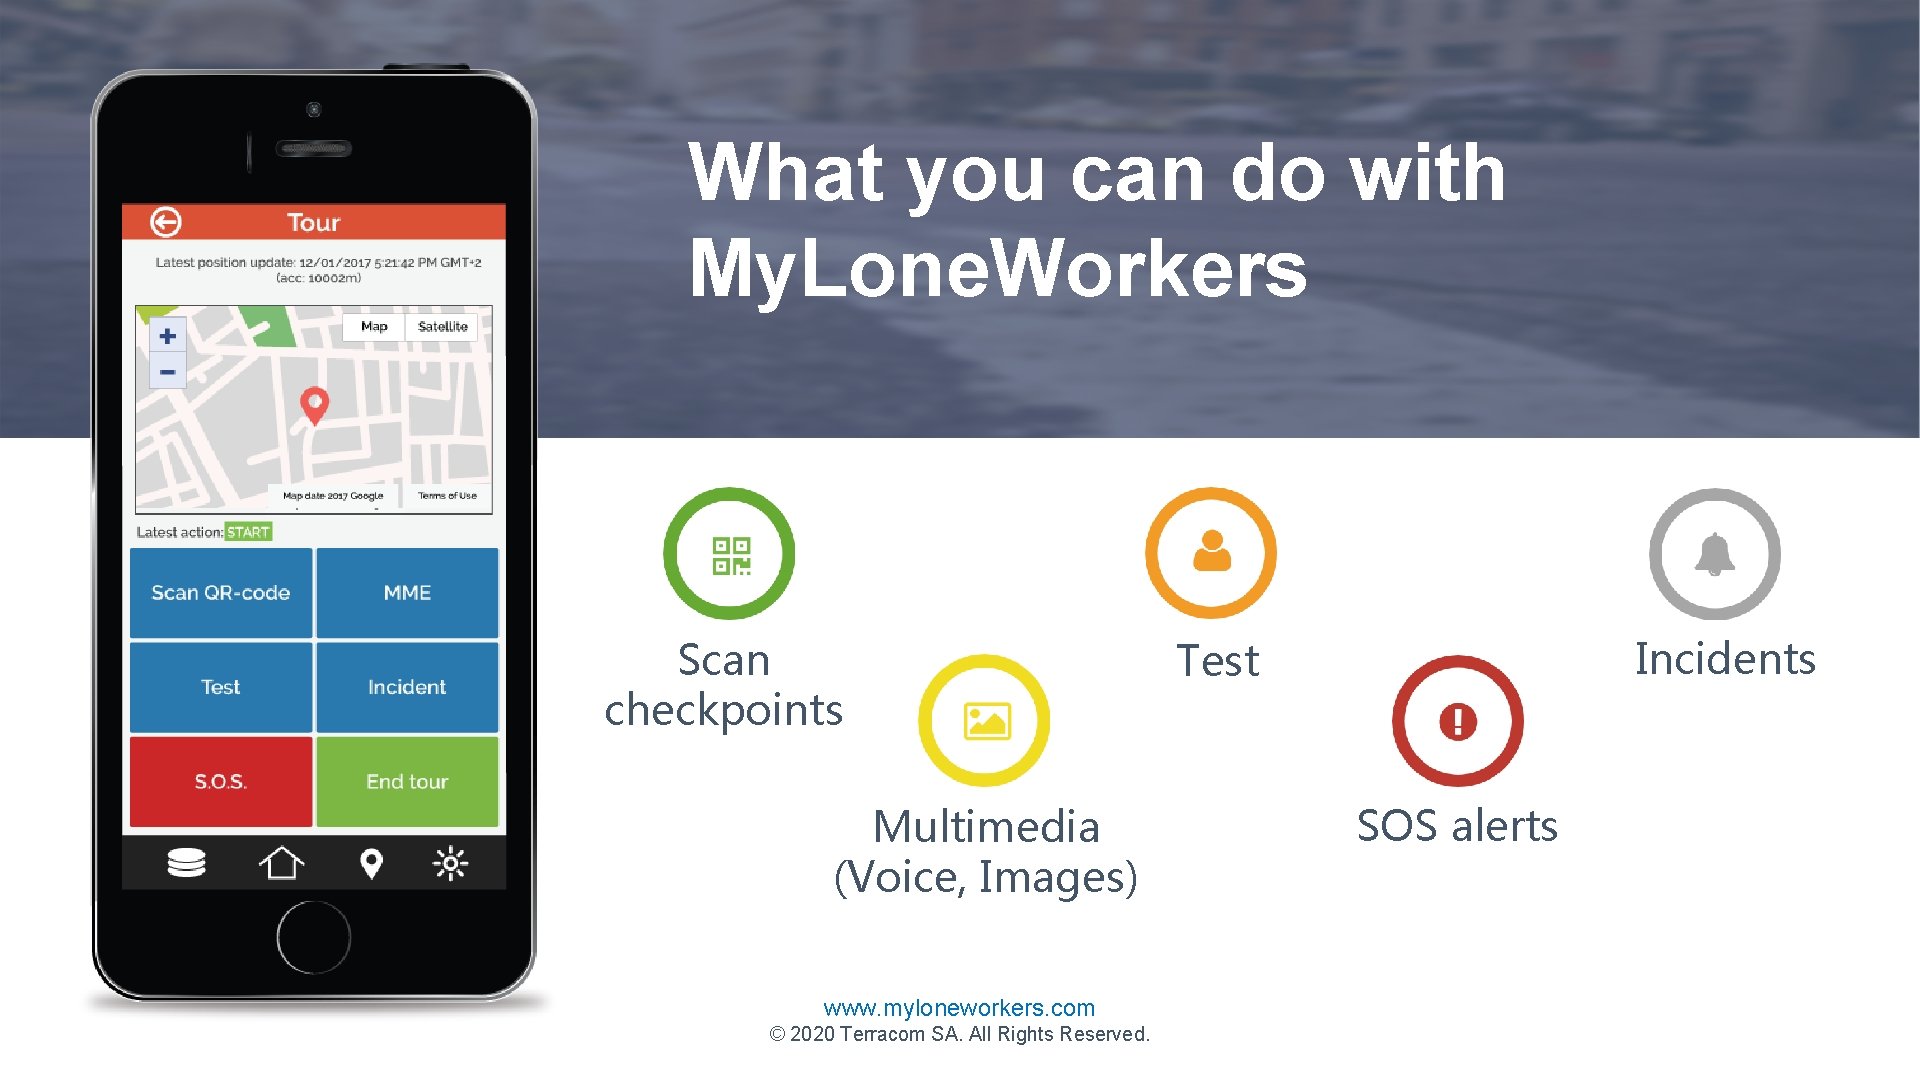 What you can do with My. Lone. Workers Scan checkpoints Multimedia (Voice, Images) www.